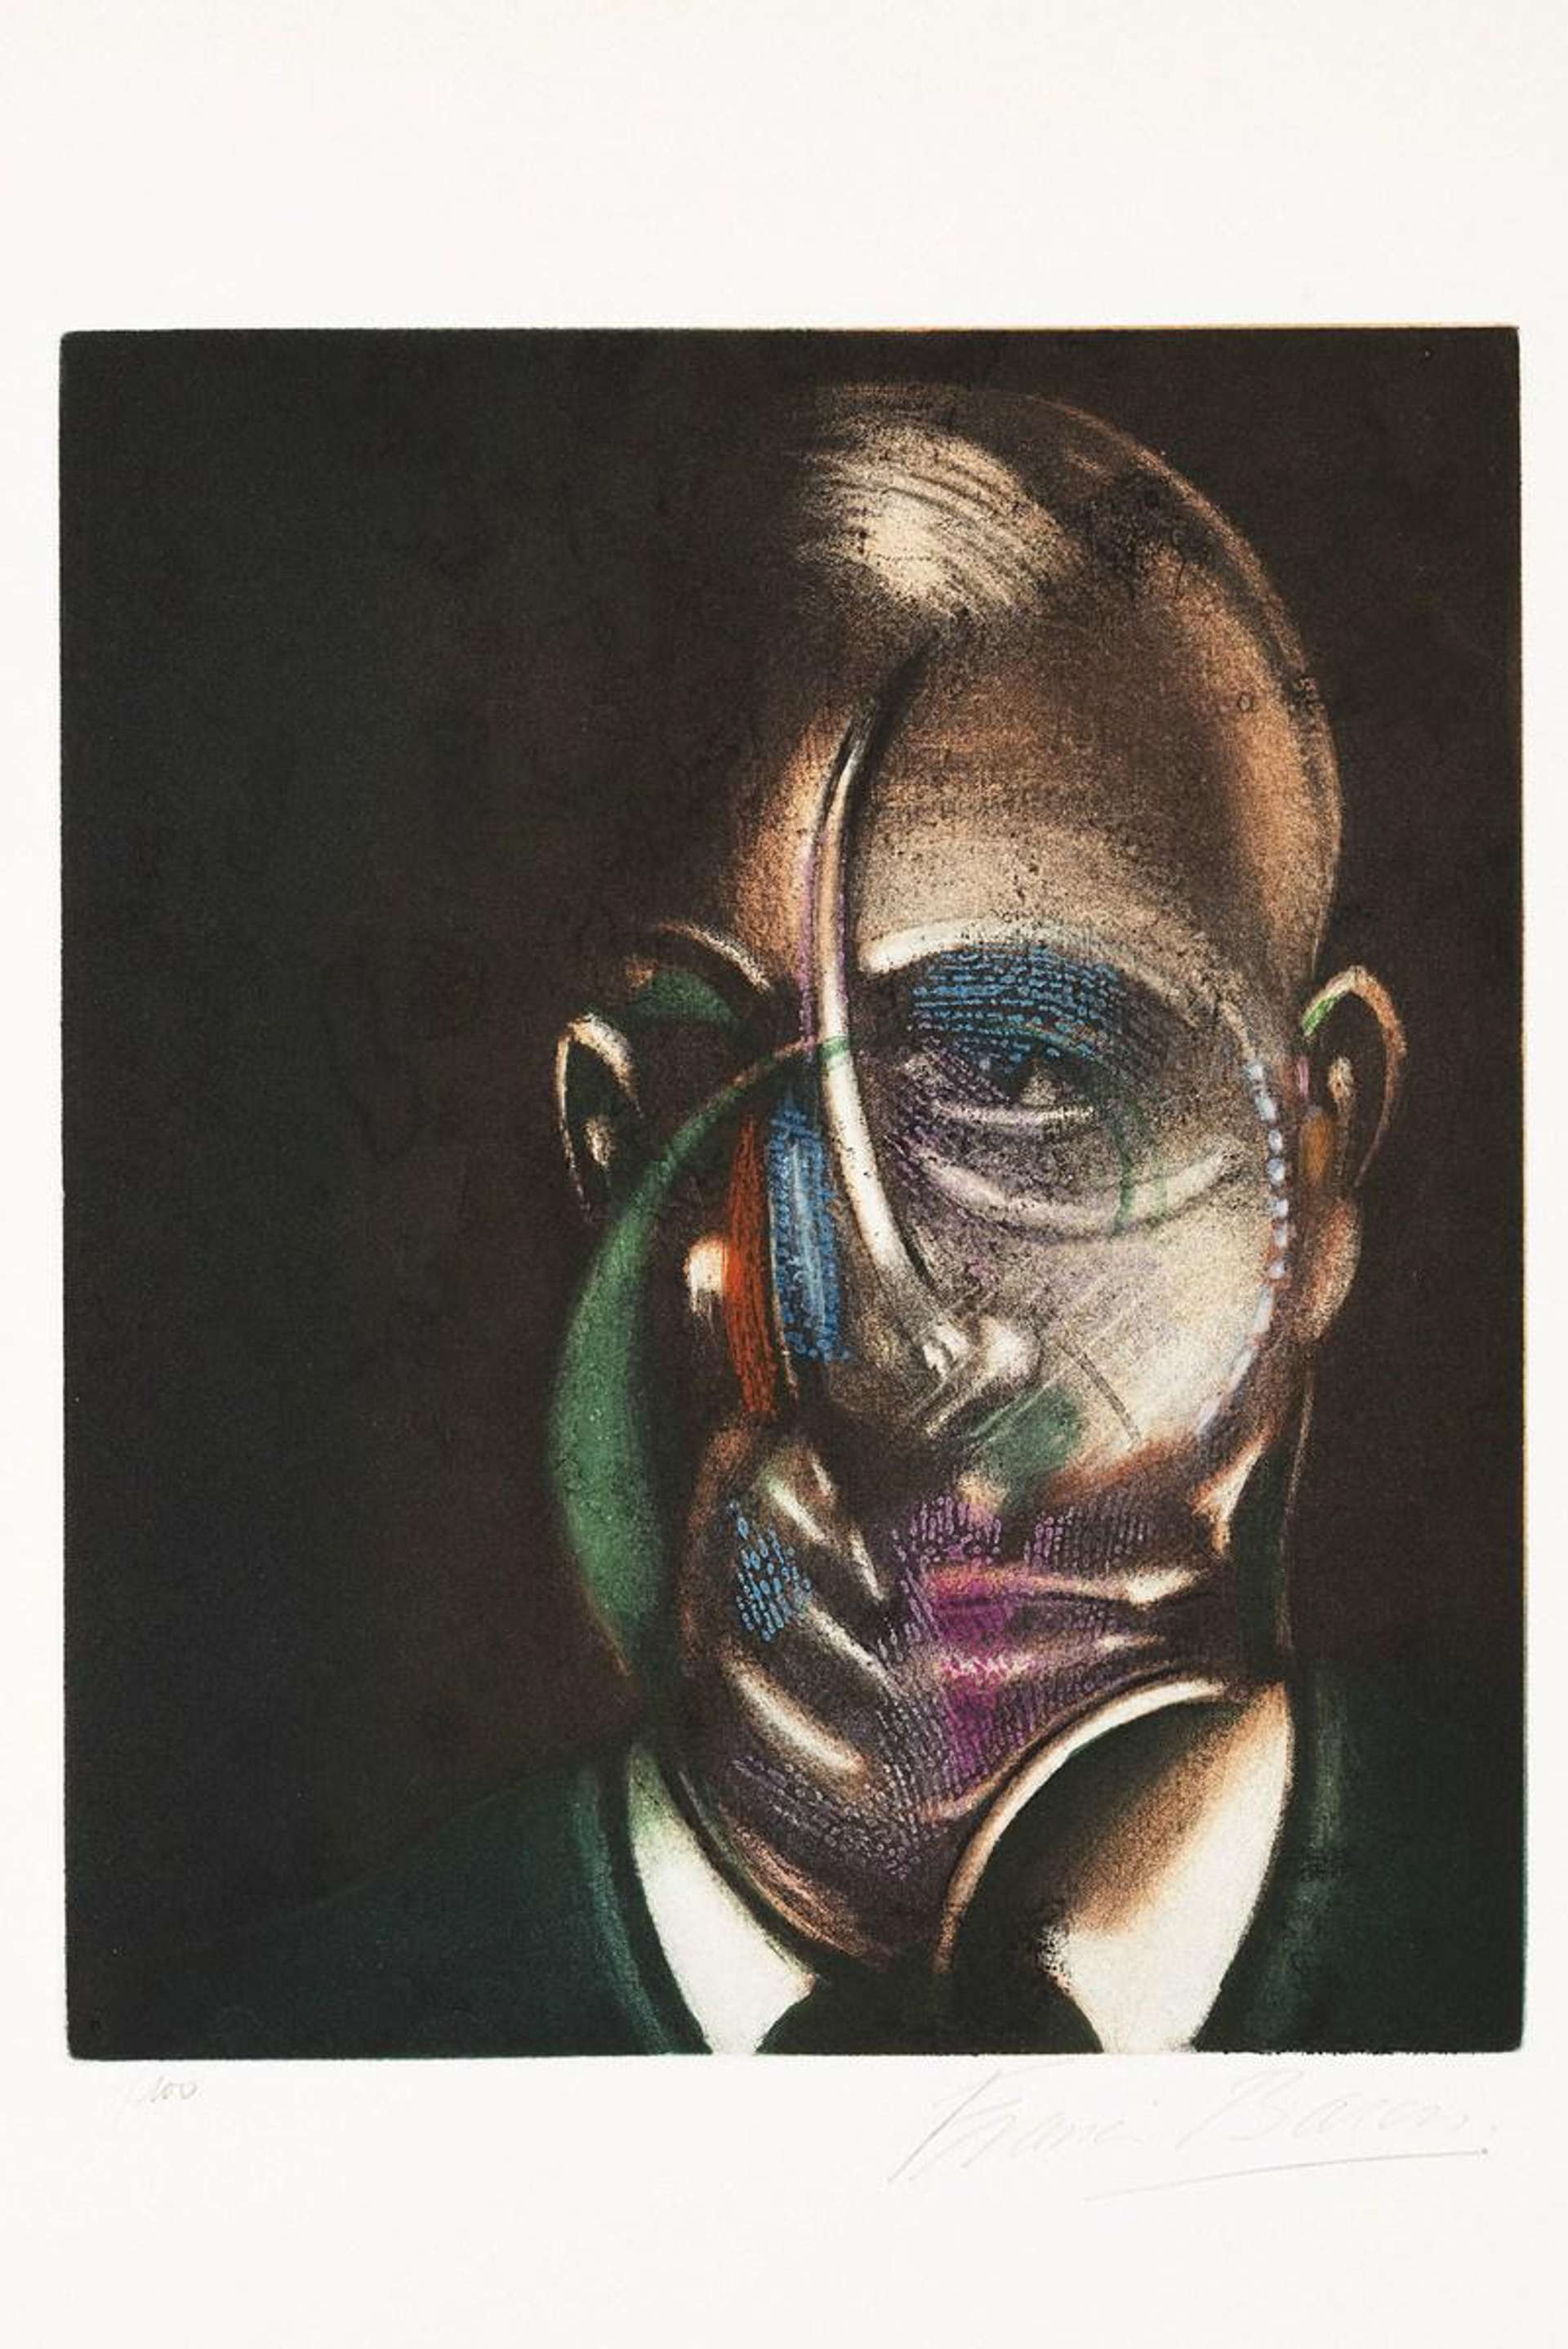 Francis Bacon's Portrait Of Michel Leiris. Painting of a man with abstract colourful brush strokes across his face